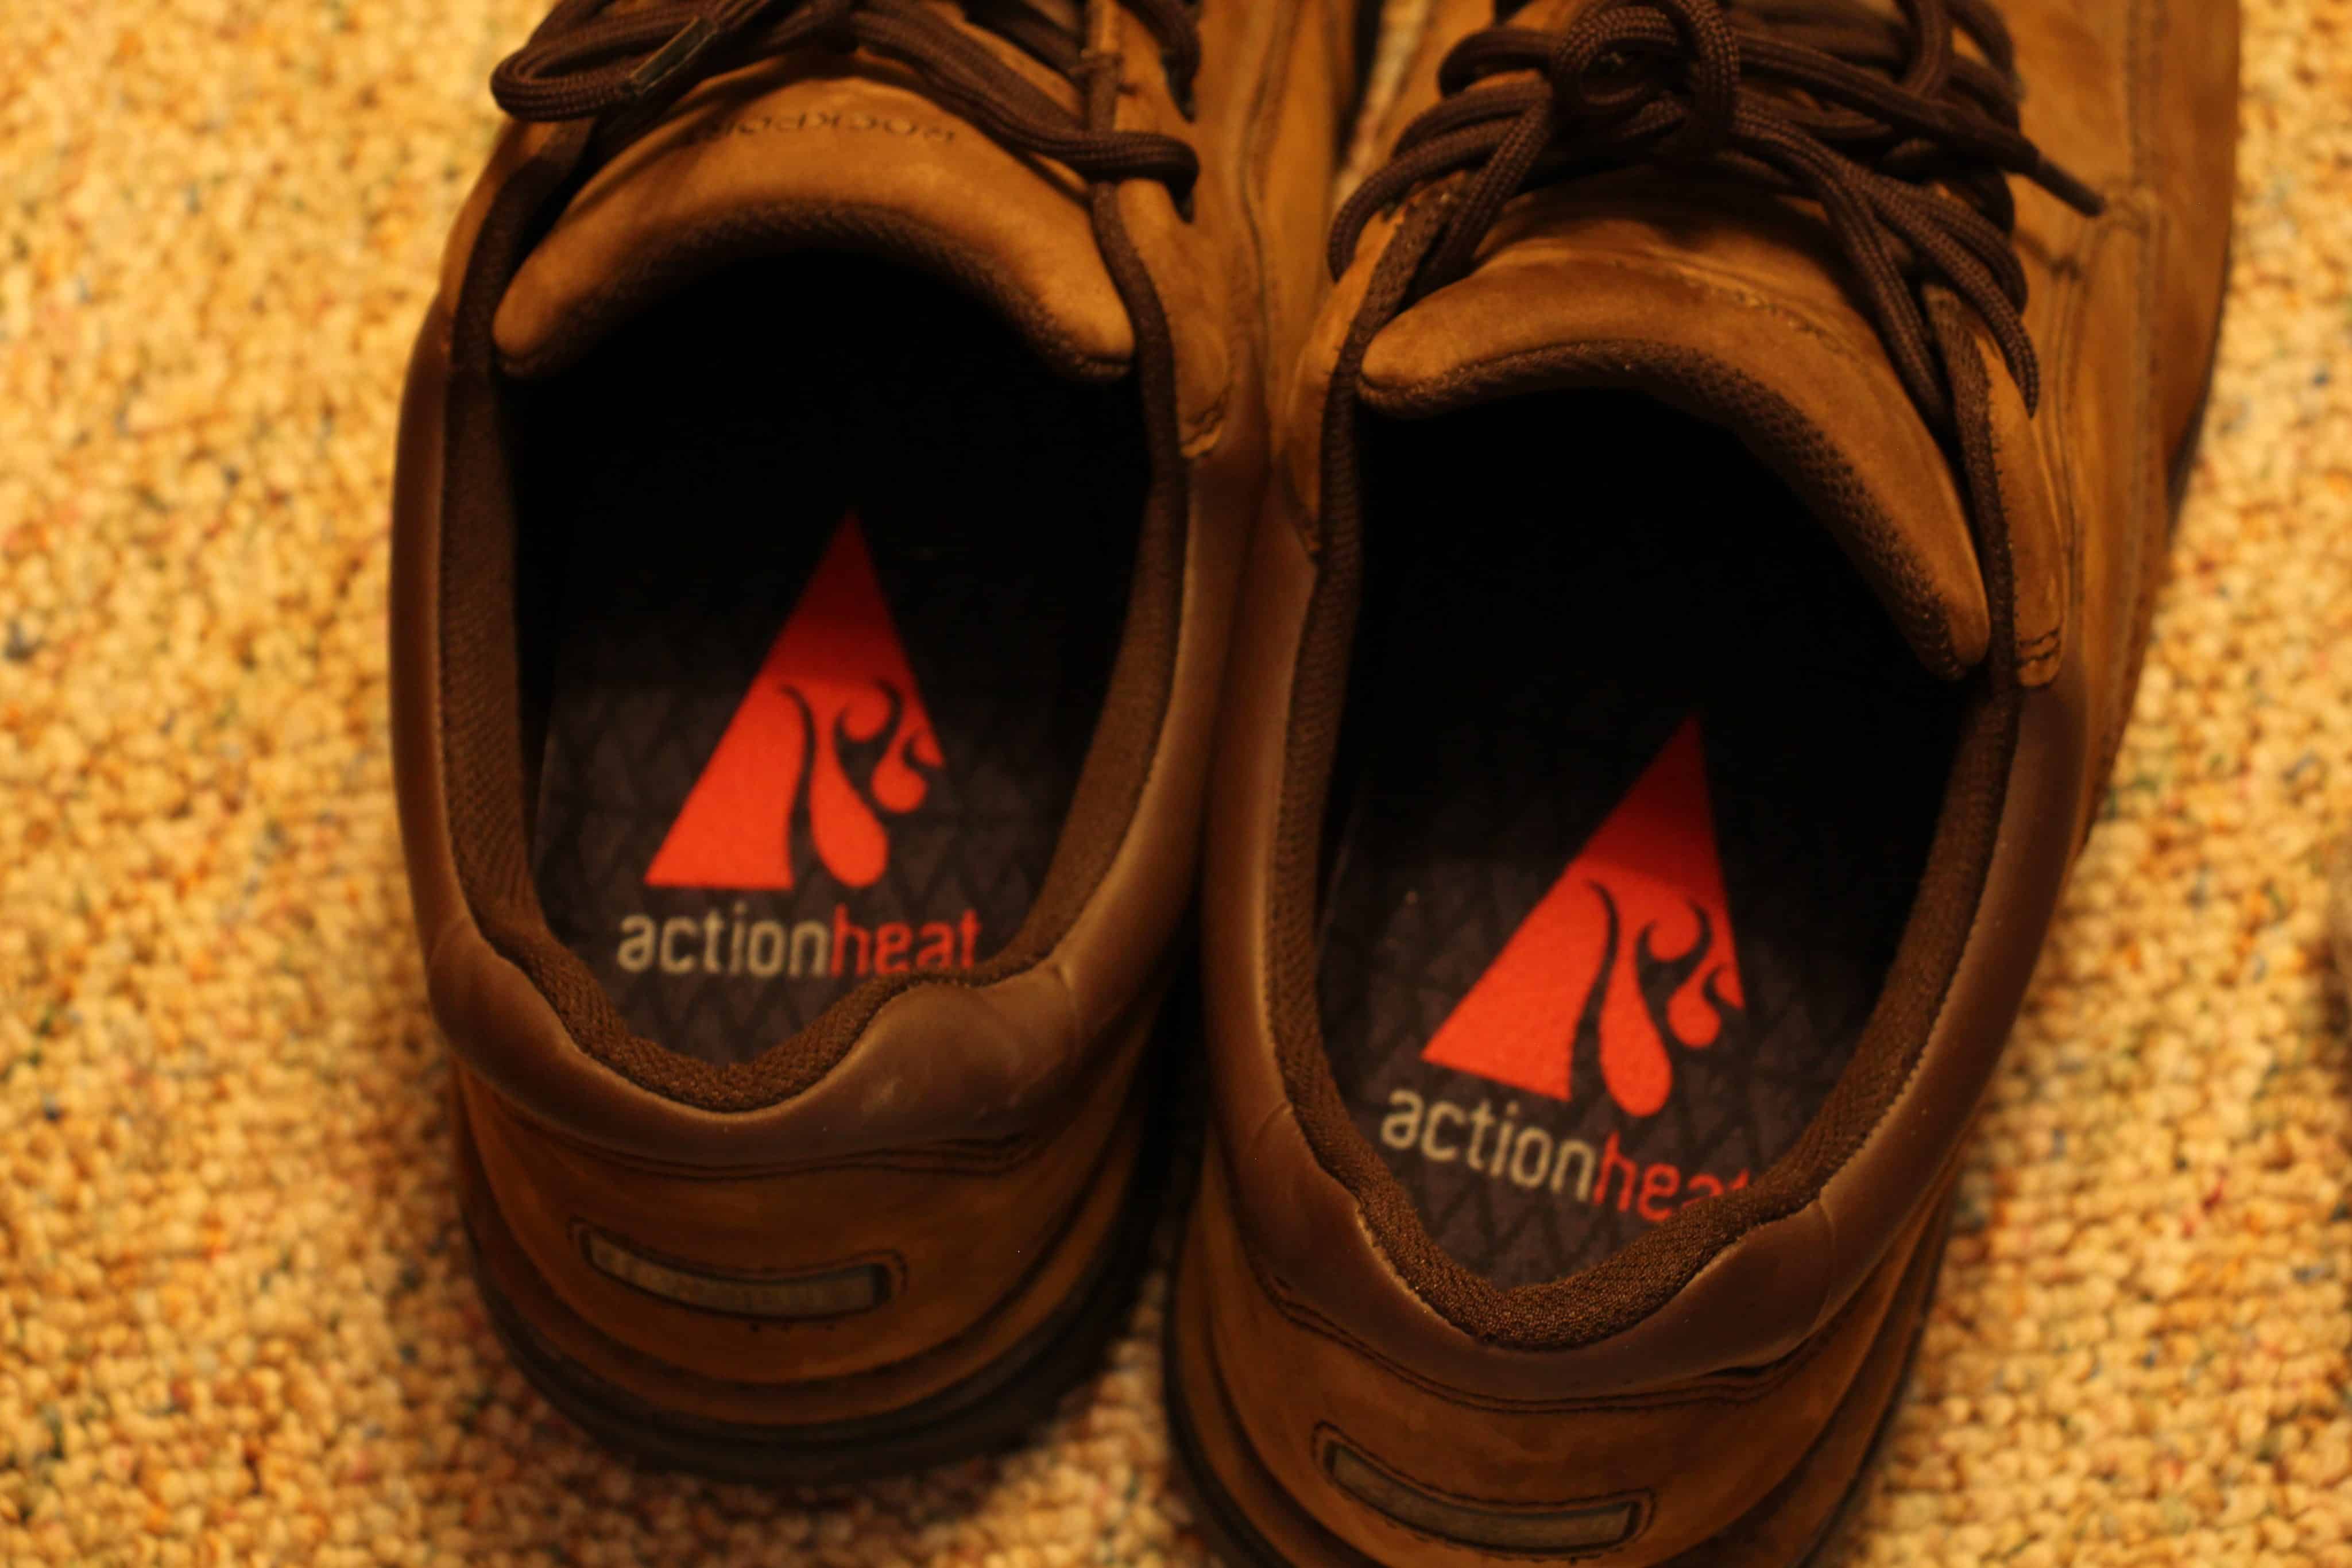 Action Heat Insoles In Shoes 2